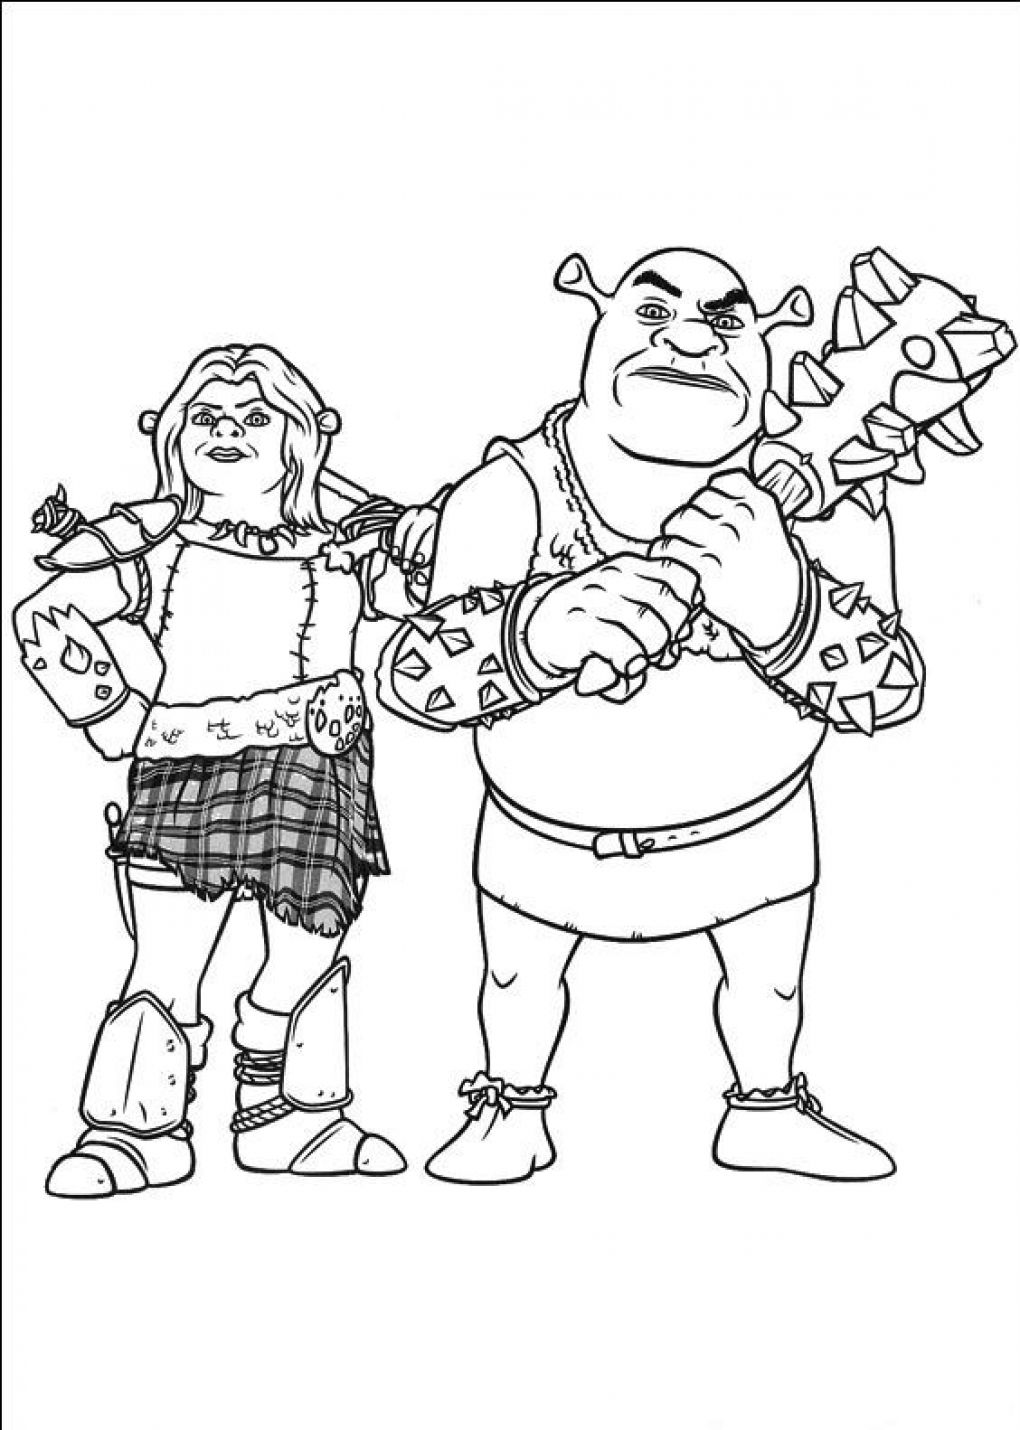 Visual from Shrek 4, with Shrek and Fiona the warrior